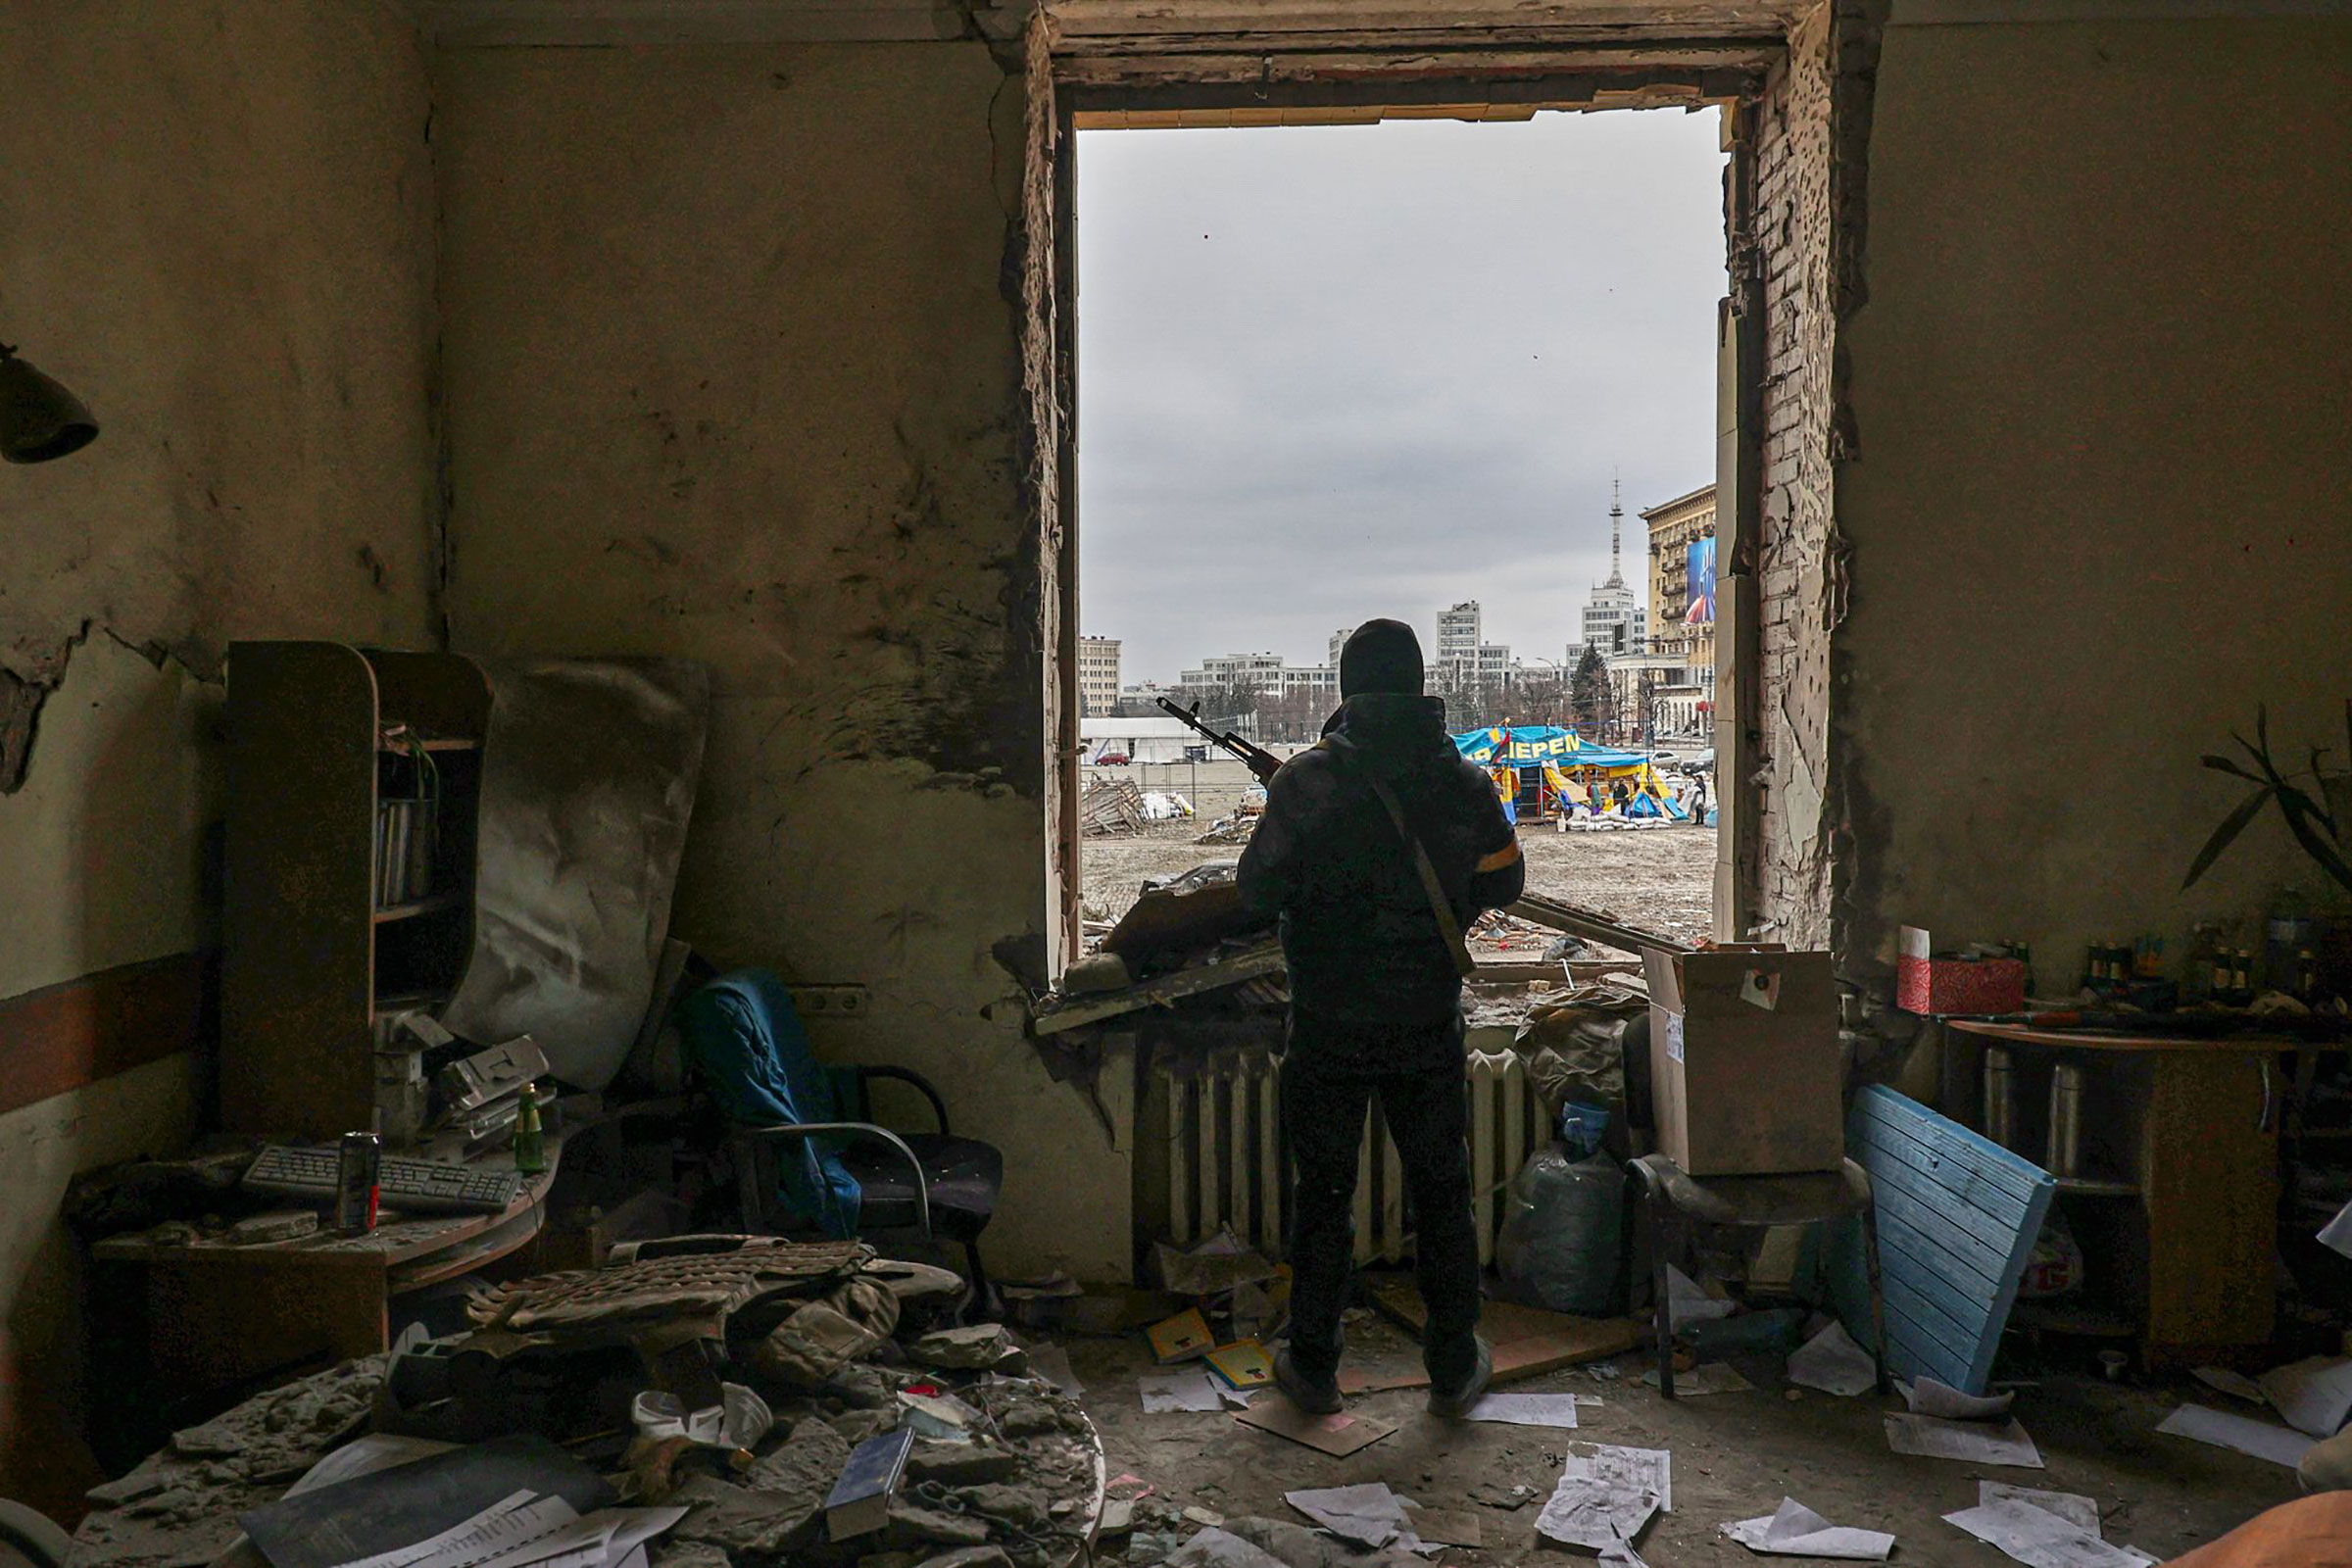 A member of the Territorial Defense Forces of Ukraine stands inside the damaged Kharkiv regional administration building in the aftermath of a shelling in downtown Kharkiv on March 1. (Sergey Kozlov—EPA-EFE/Shutterstock)